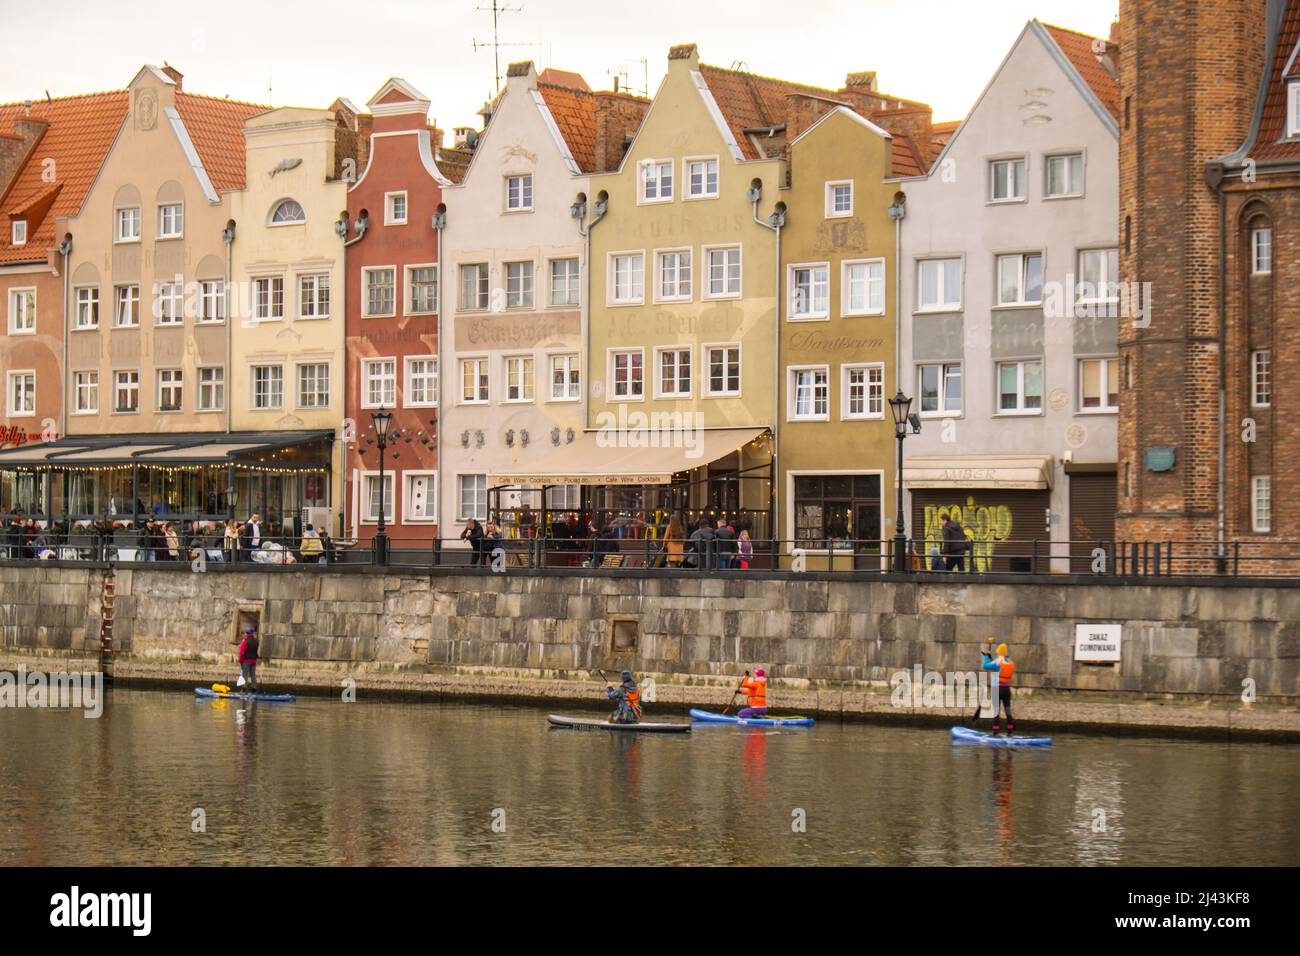 Gdansk Poland March 2022 Group of sup surfers stand up paddle board, women stand  up paddling together in the city Motlawa river and canal in old town Gdansk  Poland. Tourism attraction Active